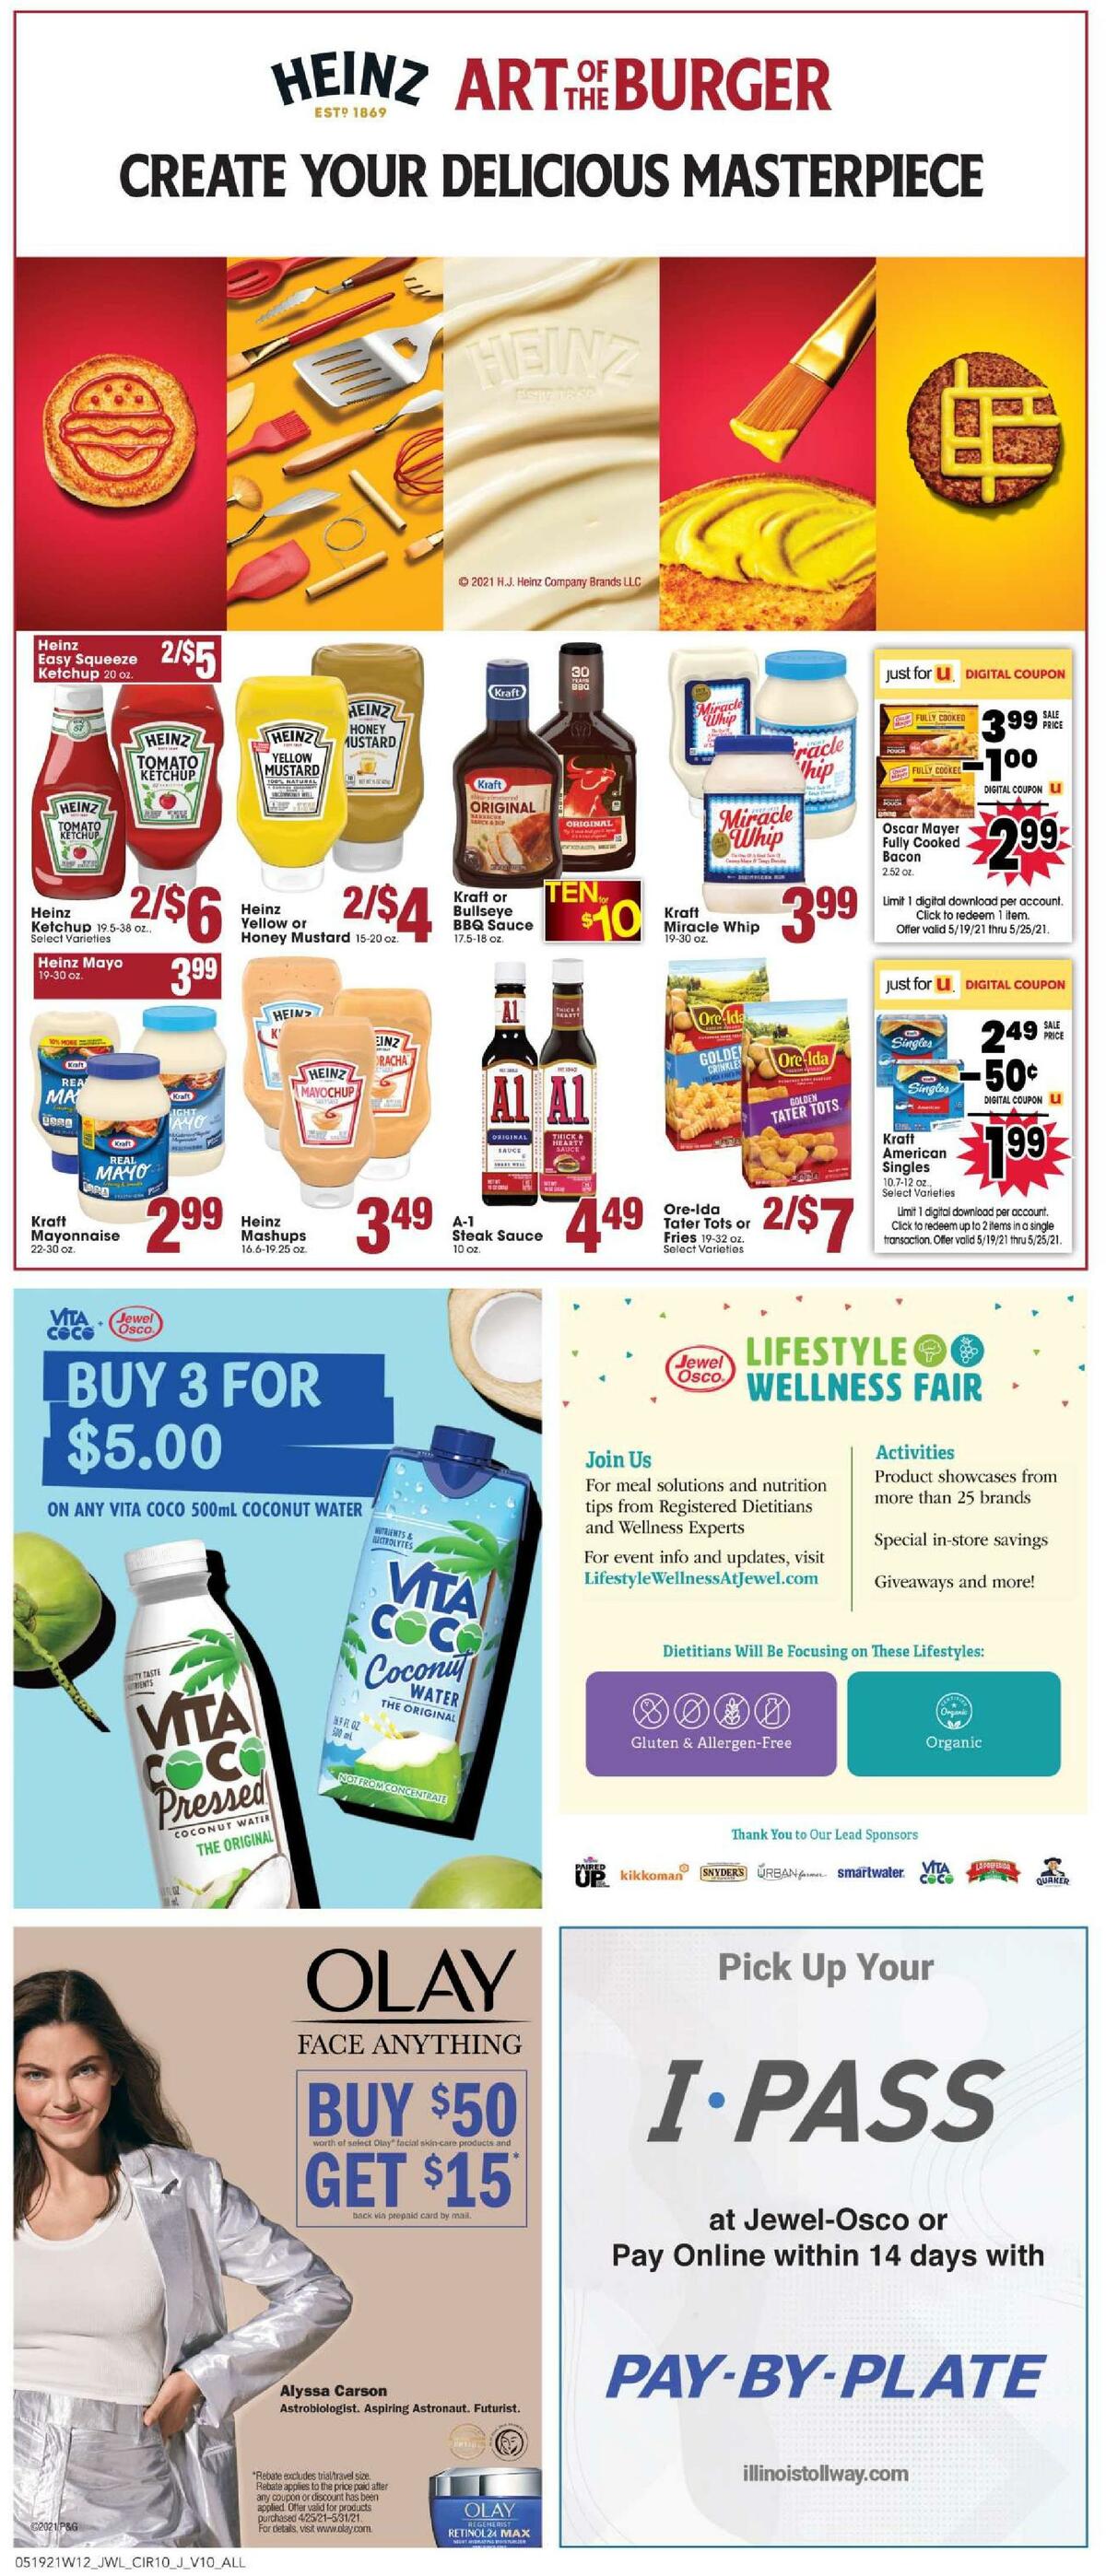 Jewel Osco Weekly Ad from May 19